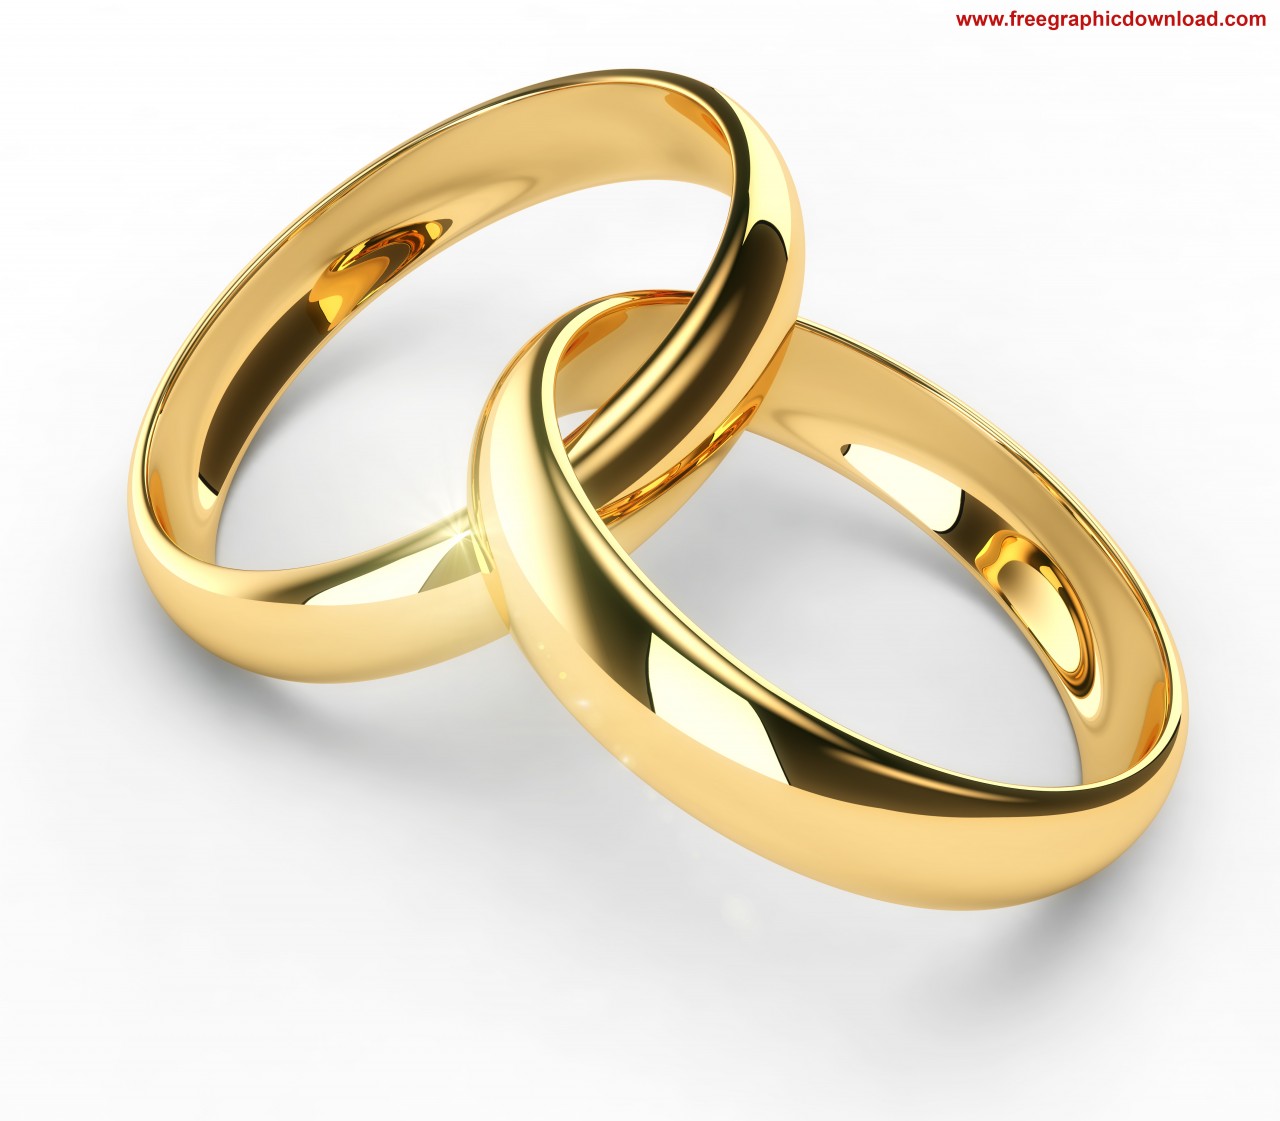 Wedding Rings   The Anglican Parish Of Forster Tuncurry